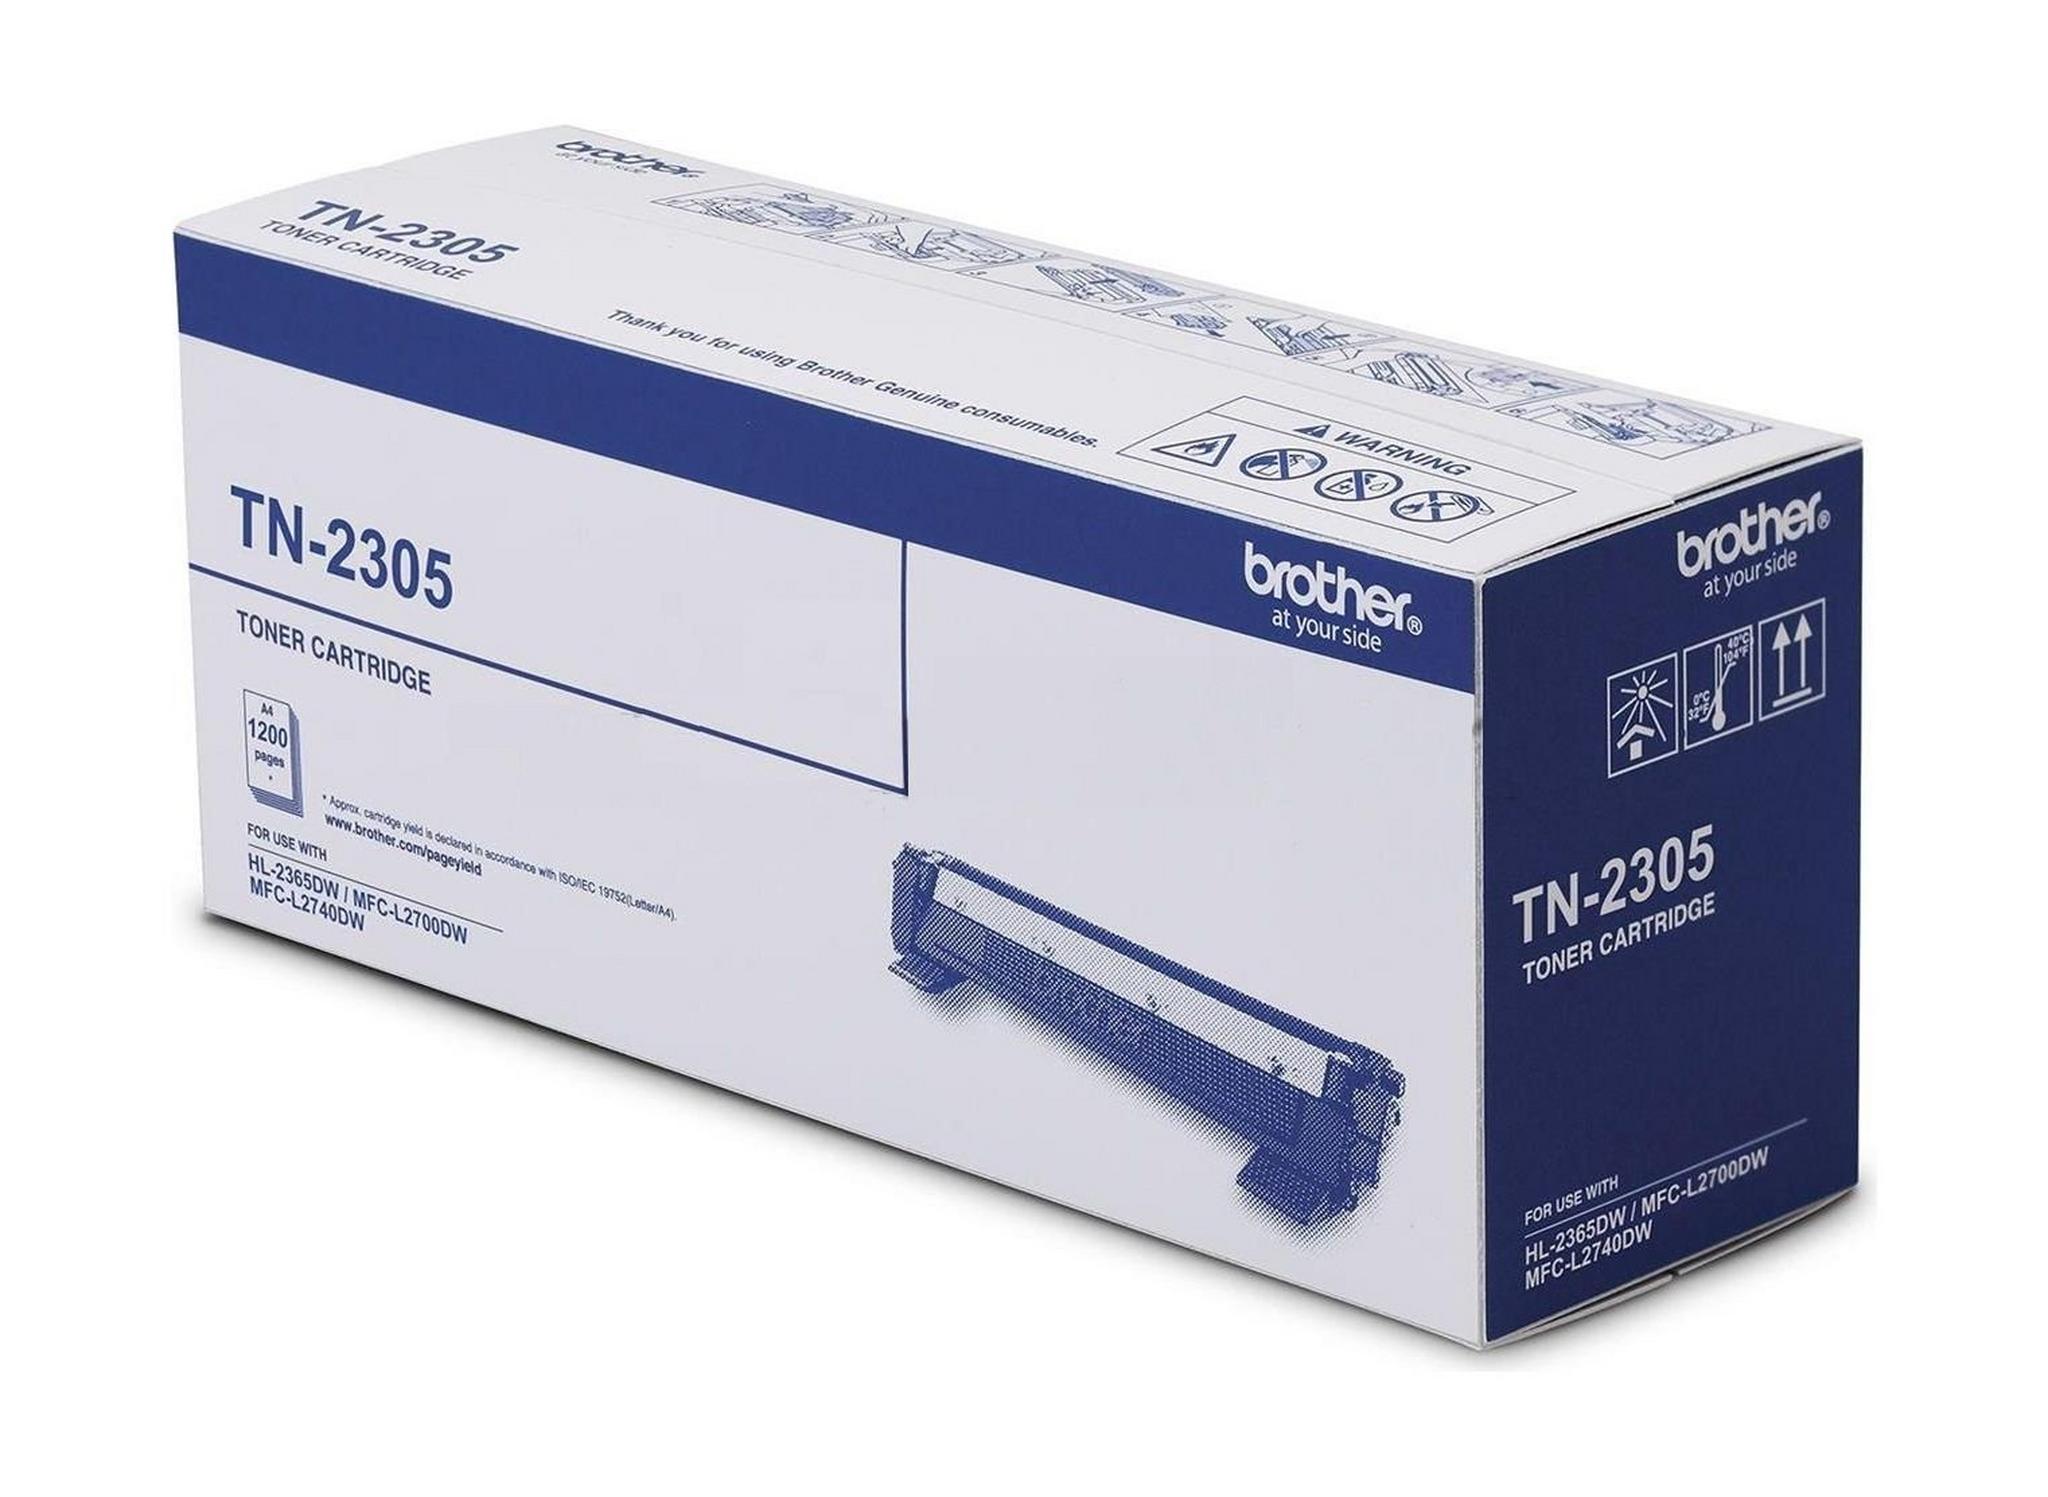 BROTHER Toner TN2305B for LaserJet Printing 1200 Page Yield - Black (Single Colour Pack)